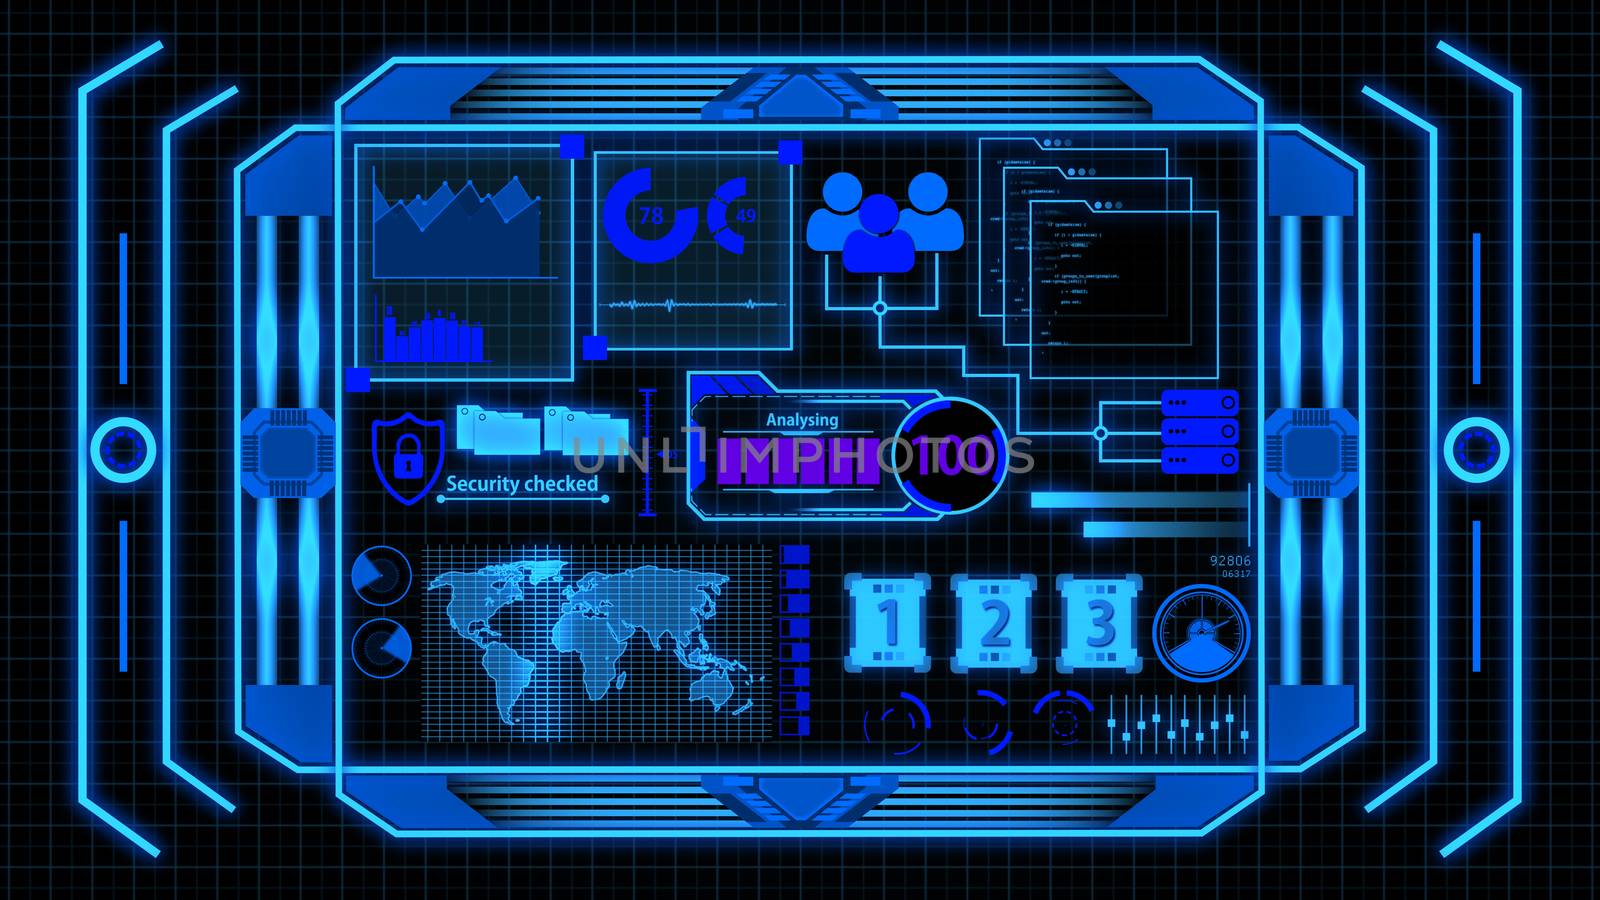 Screen With Blue Data Analysis Details including Loading bar, world map, cyber security, graph, chart, hacker typing and digital elements Background by ariya23156